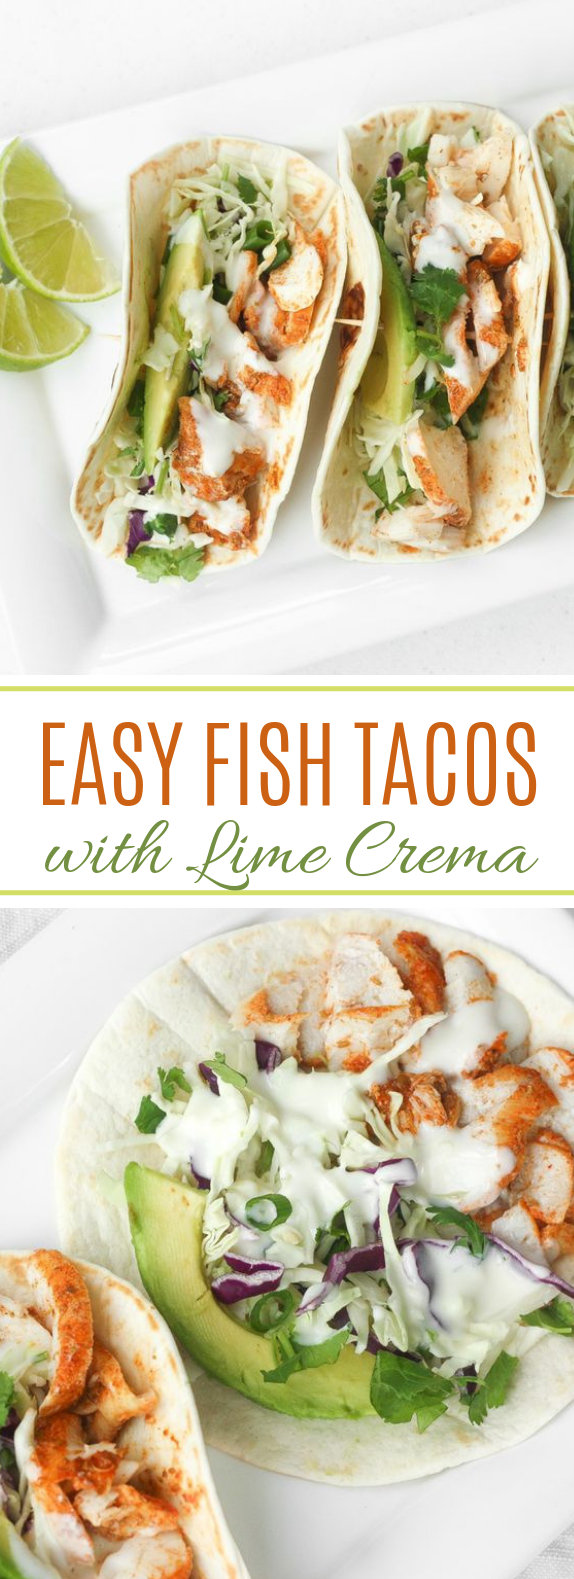 Easy Fish Tacos with Lime Crema #mexican #seafood